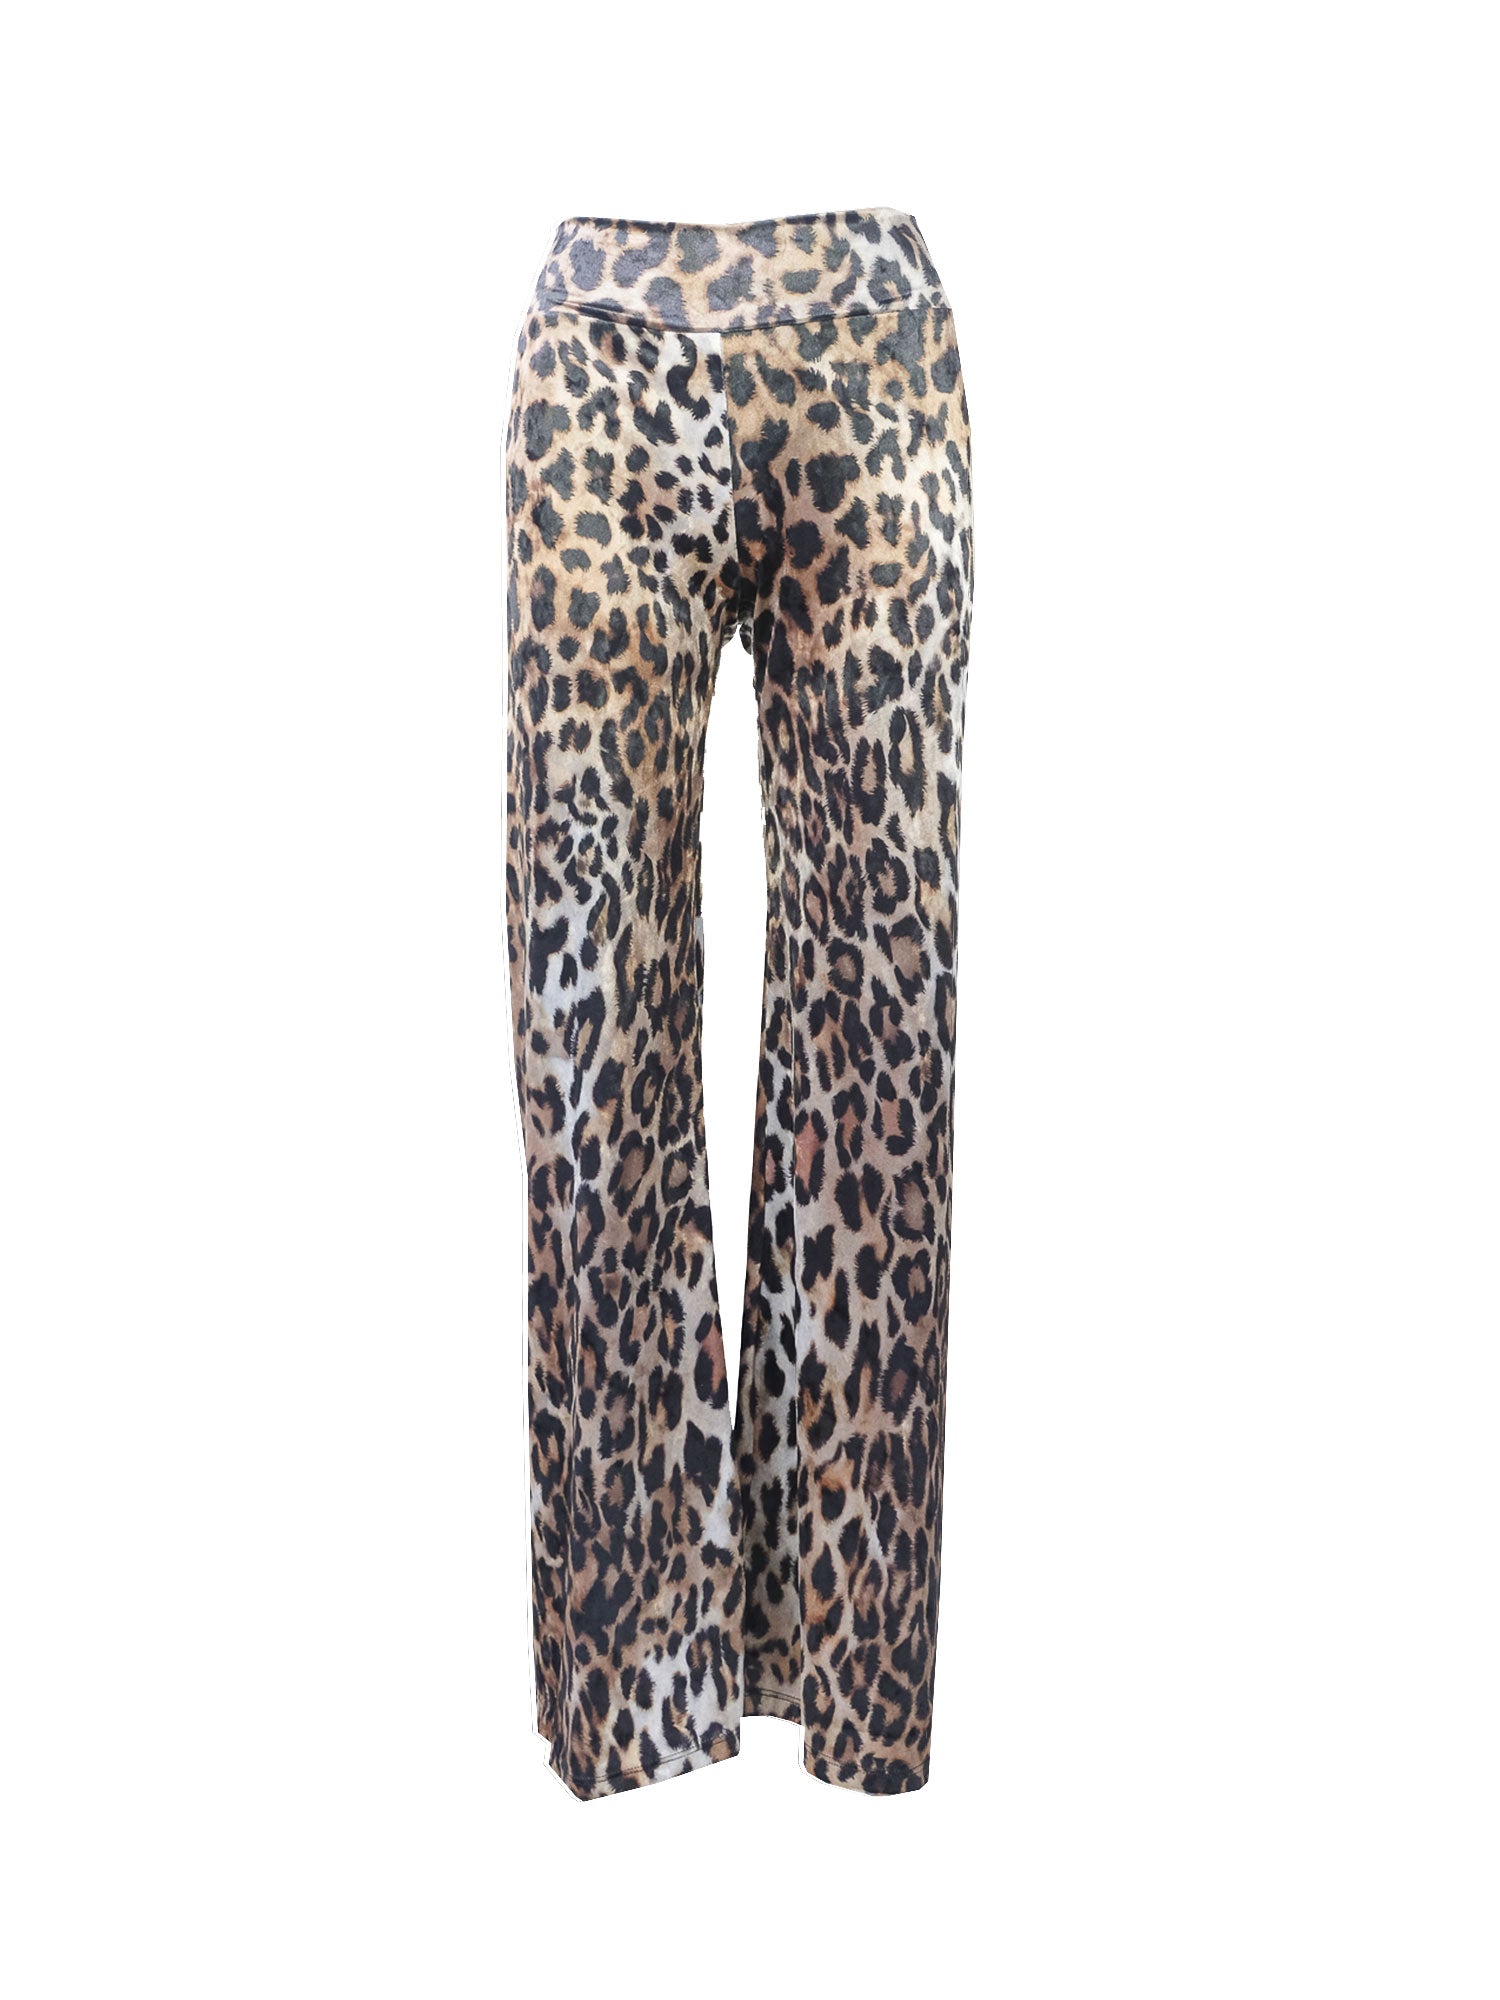 MIMI - trousers in animalier hammered chenille